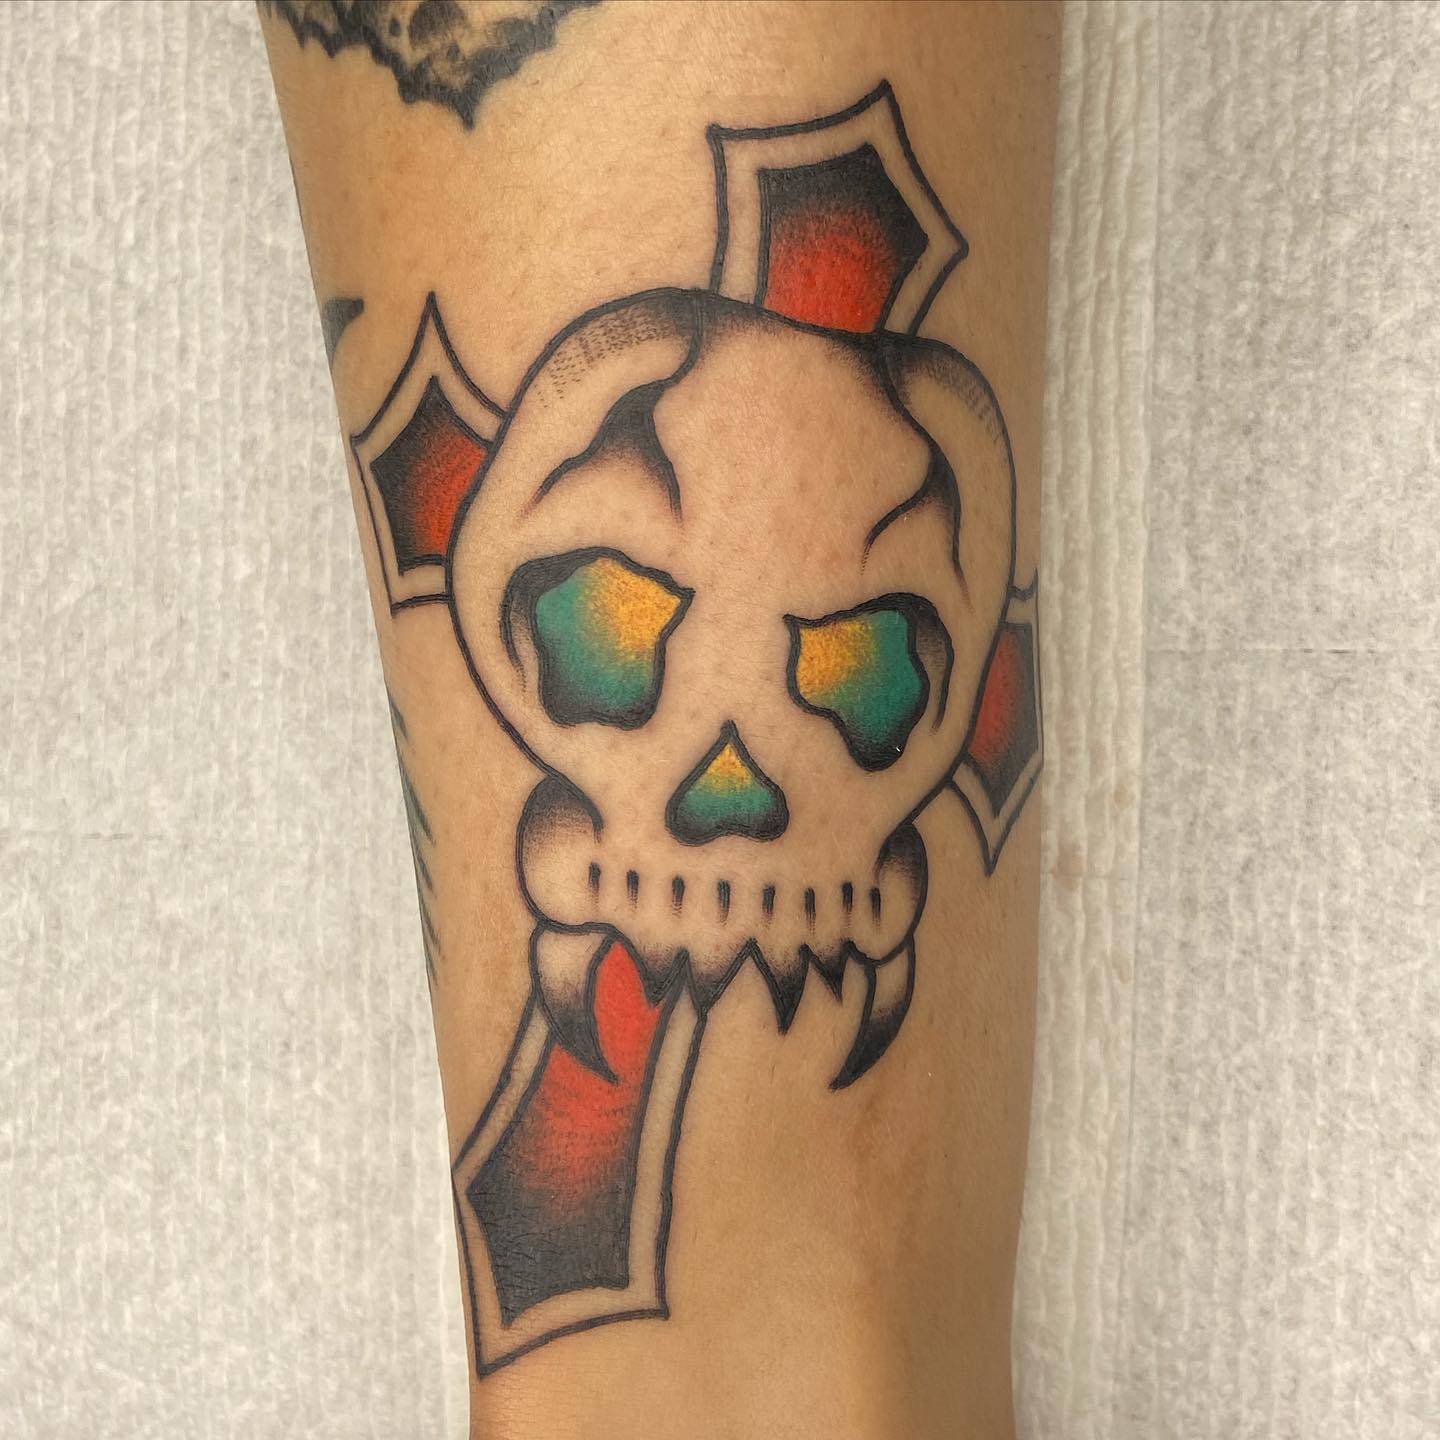 Skull tattoo lovers will adore this tattoo a lot. A scary skull is placed in the middle of a cross. The colors used take this tattoo a whole different level. In the cross, black and red shades offer a strong look while yellow and blue shades used in the skull are fun.